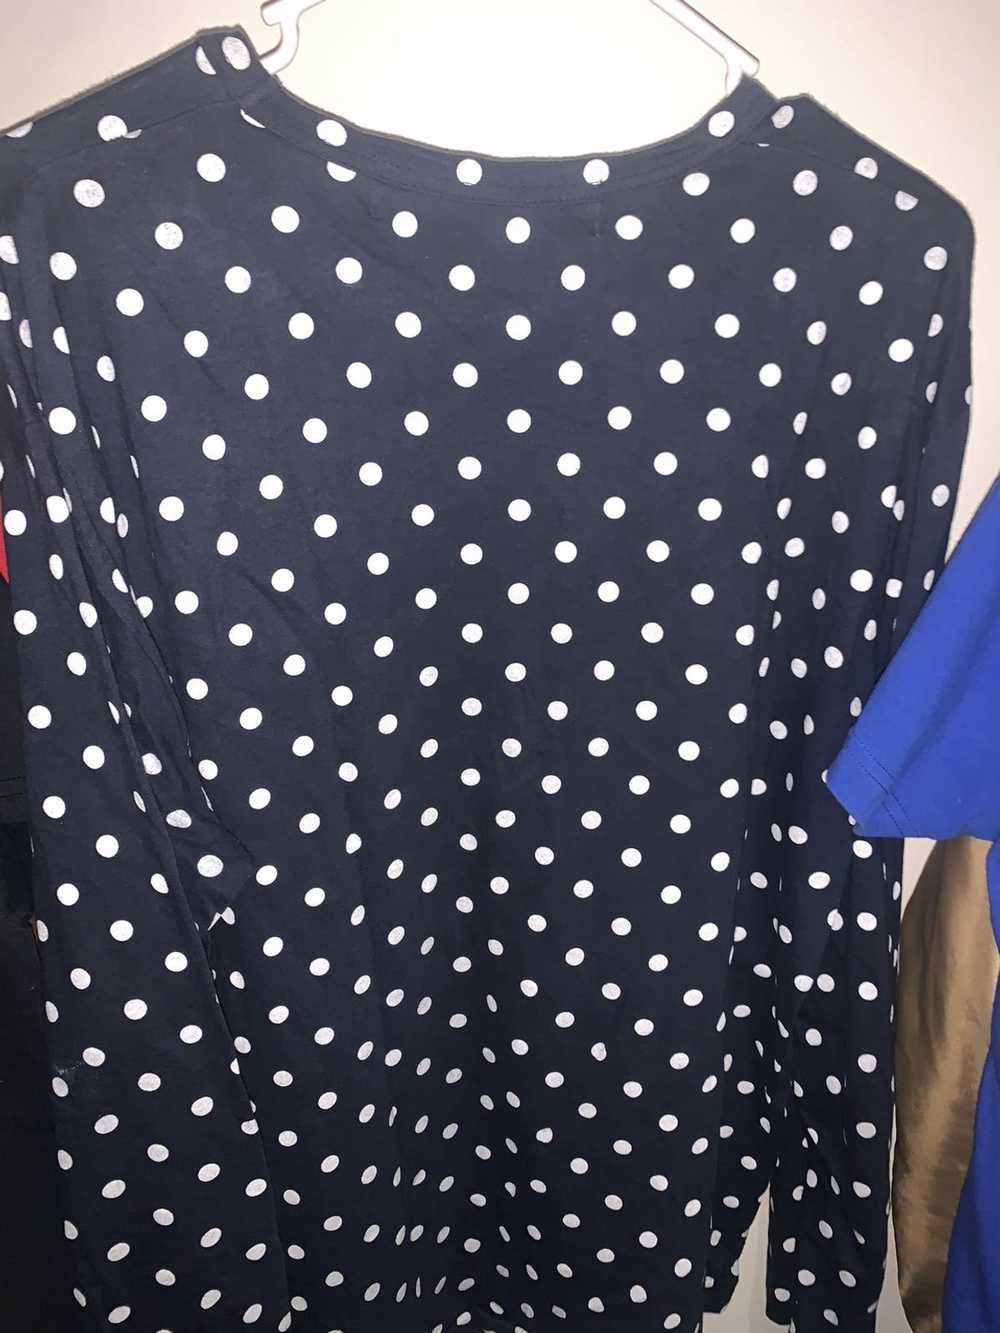 Comme des Garcons Play L/S Blue Polka Dot Tee - image 3